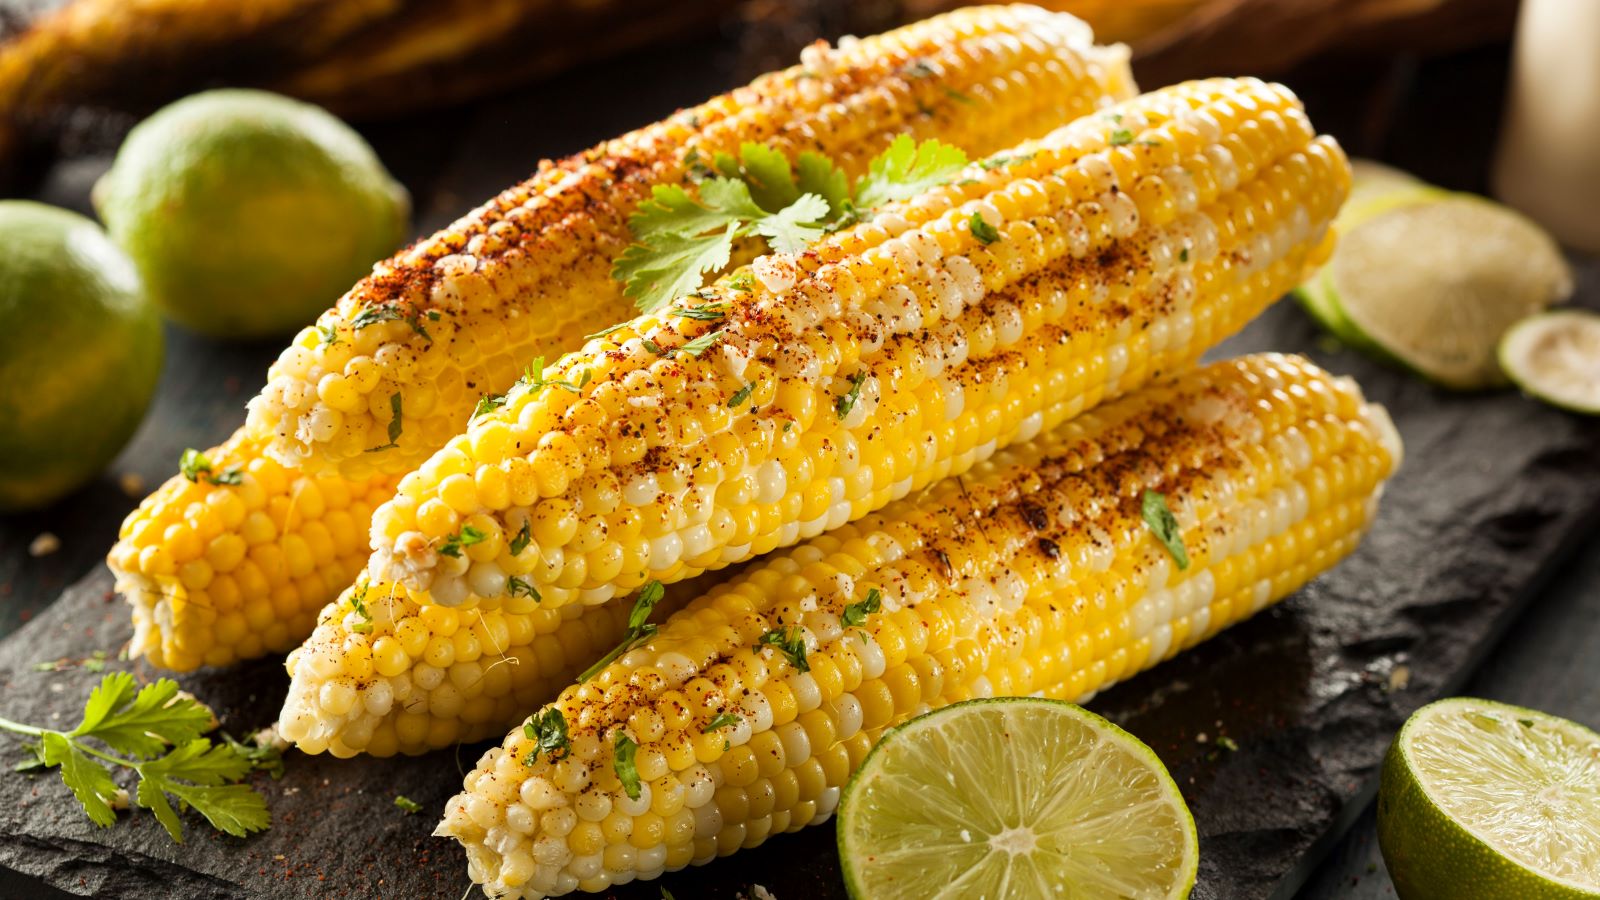 A registered dietitian explains the health benefits of corn and how you can integrate it into your next meal.